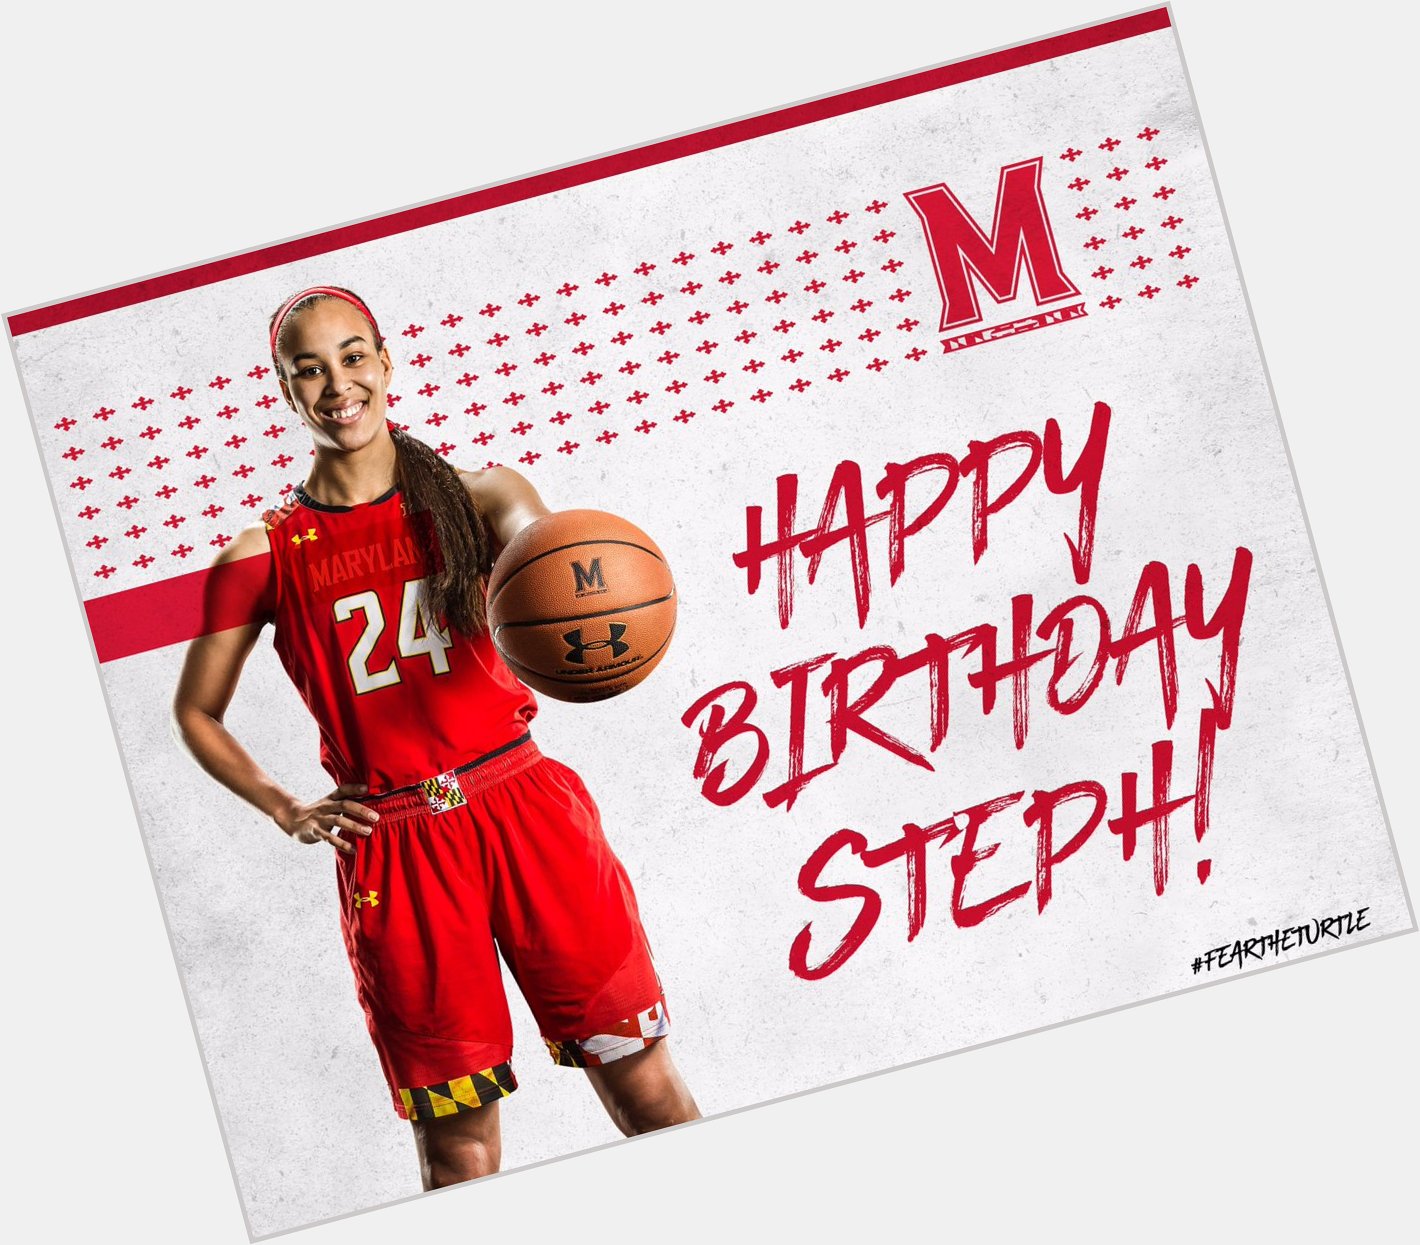 Everyone be sure to wish our very own Steph Jones a Happy Birthday! 